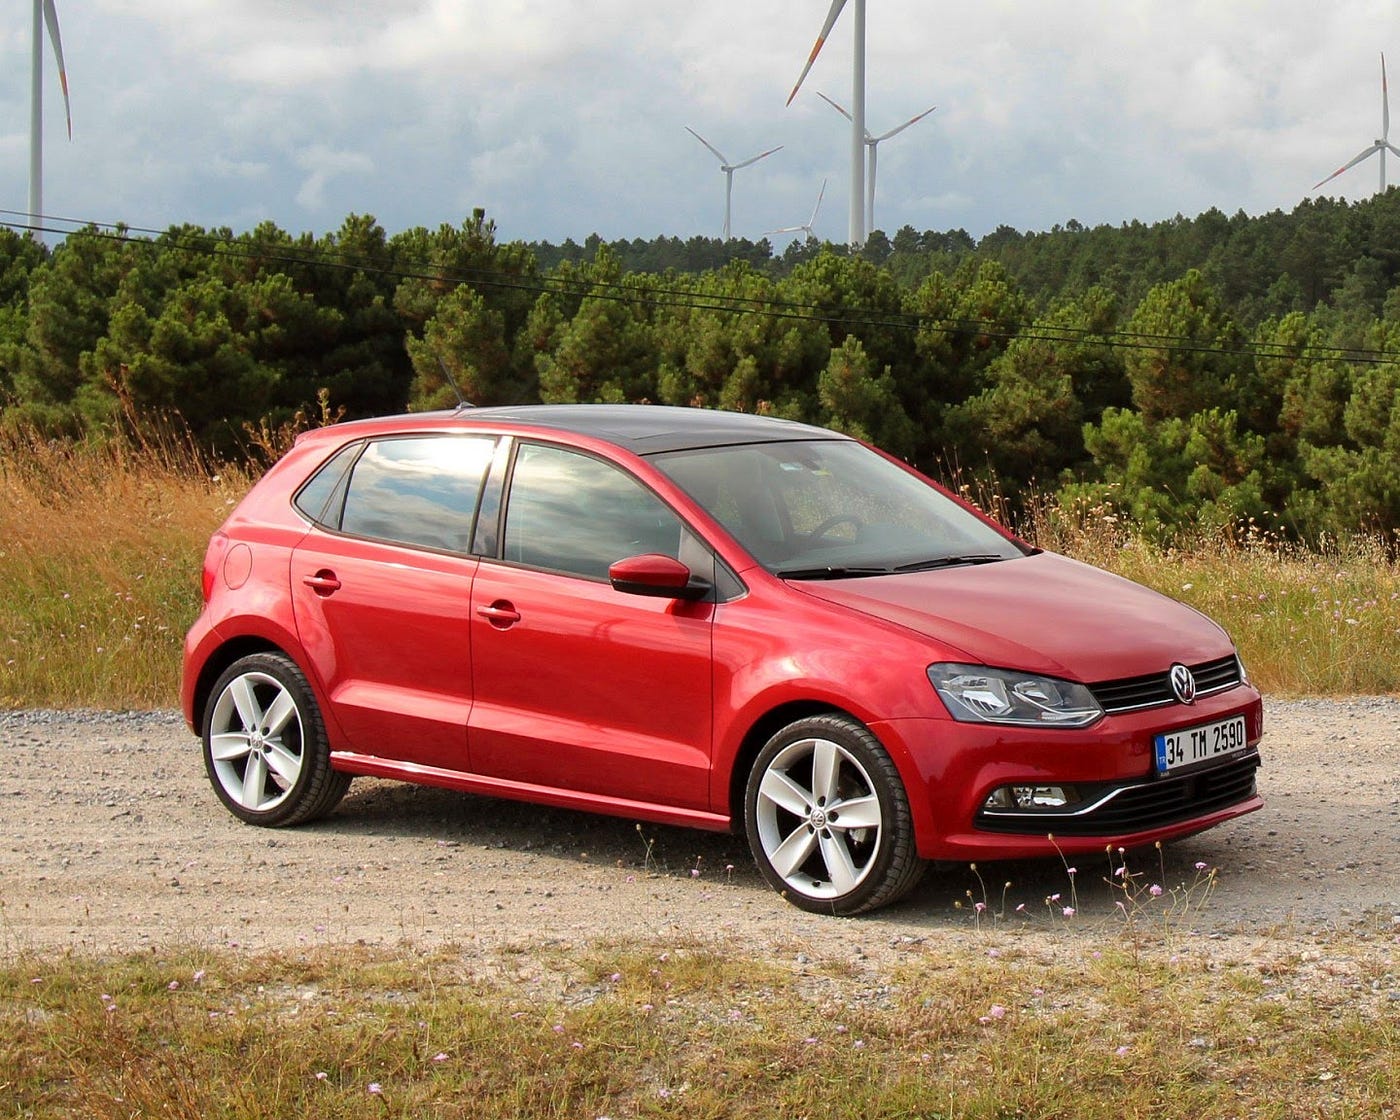 The Volkswagen Polo TSI 1.2 : A review by a long-distance driving